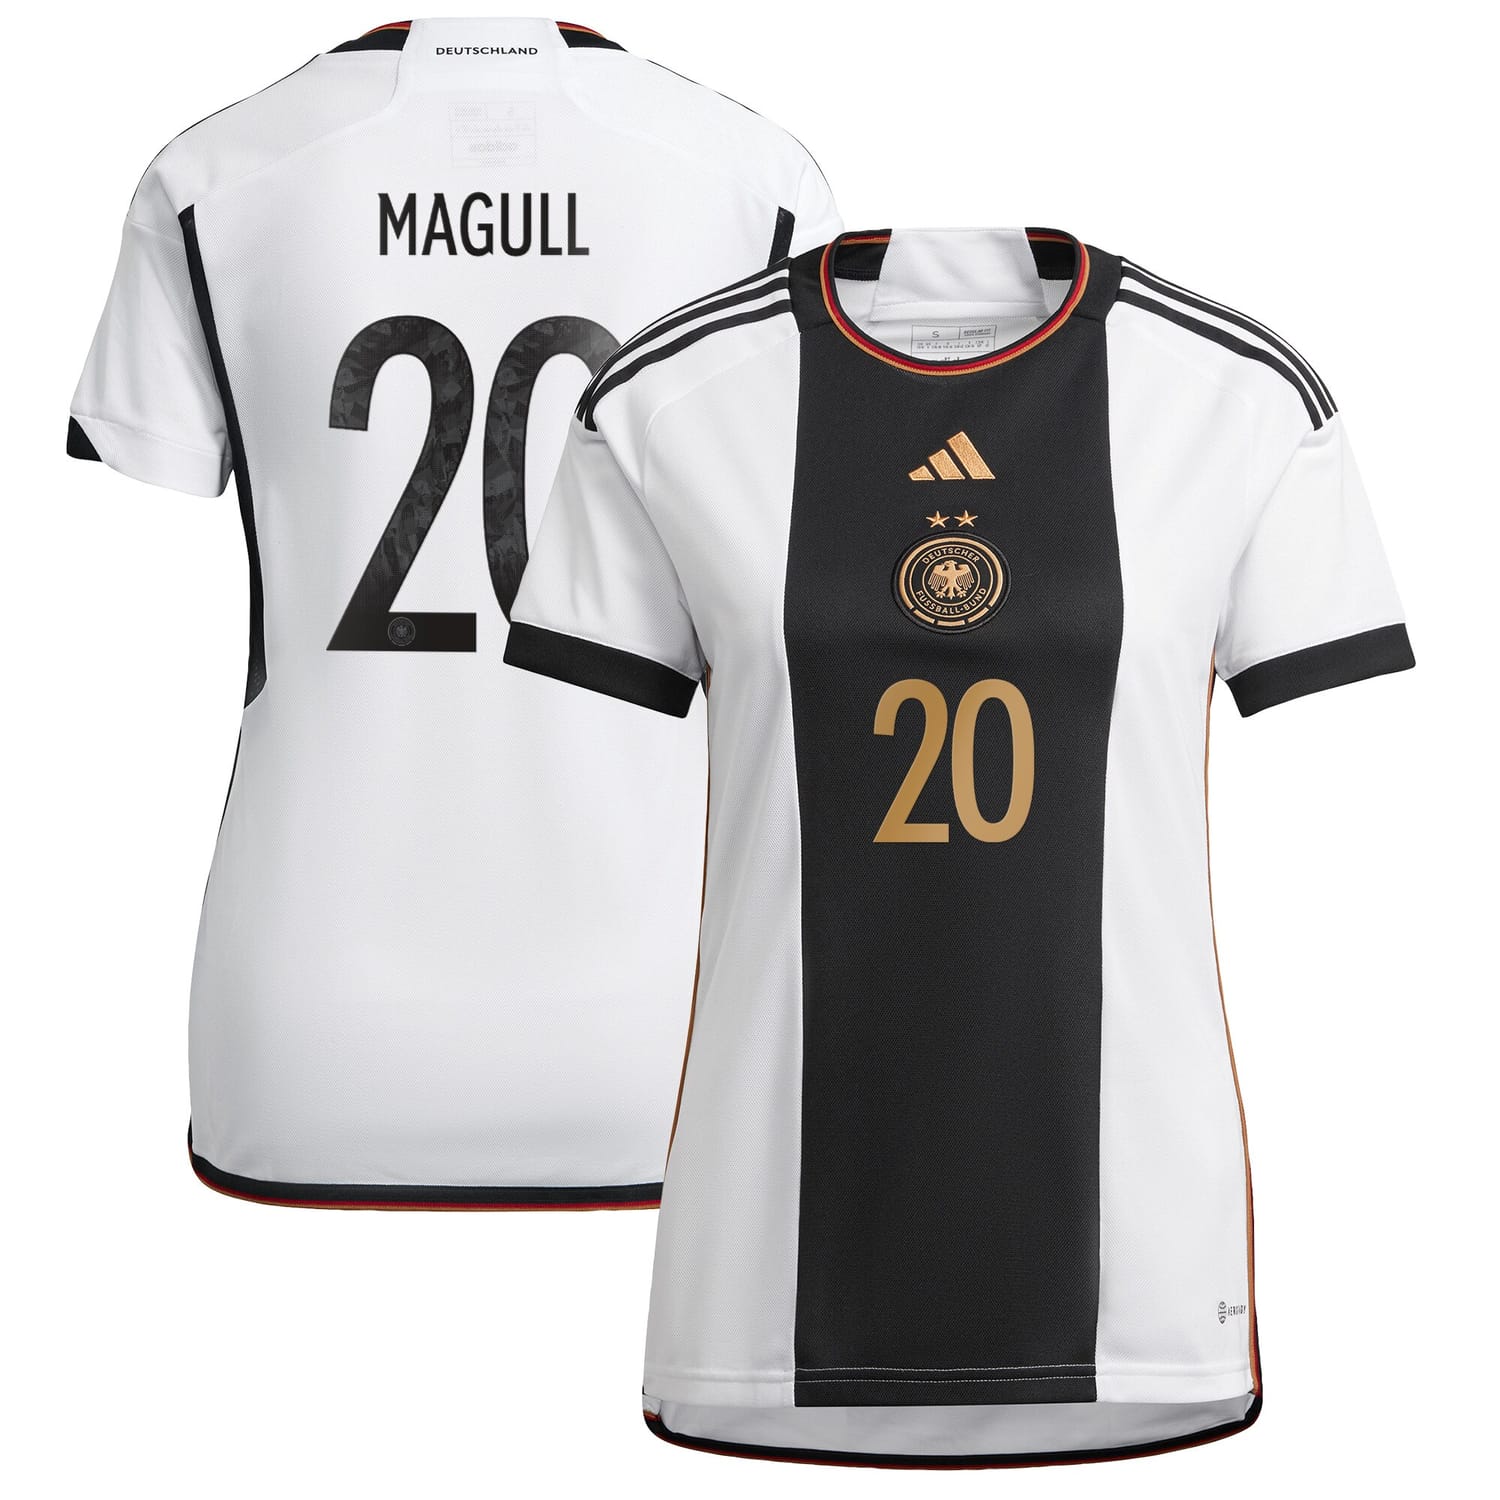 Germany National Team Home Jersey Shirt player Lina Magull 20 printing for Women